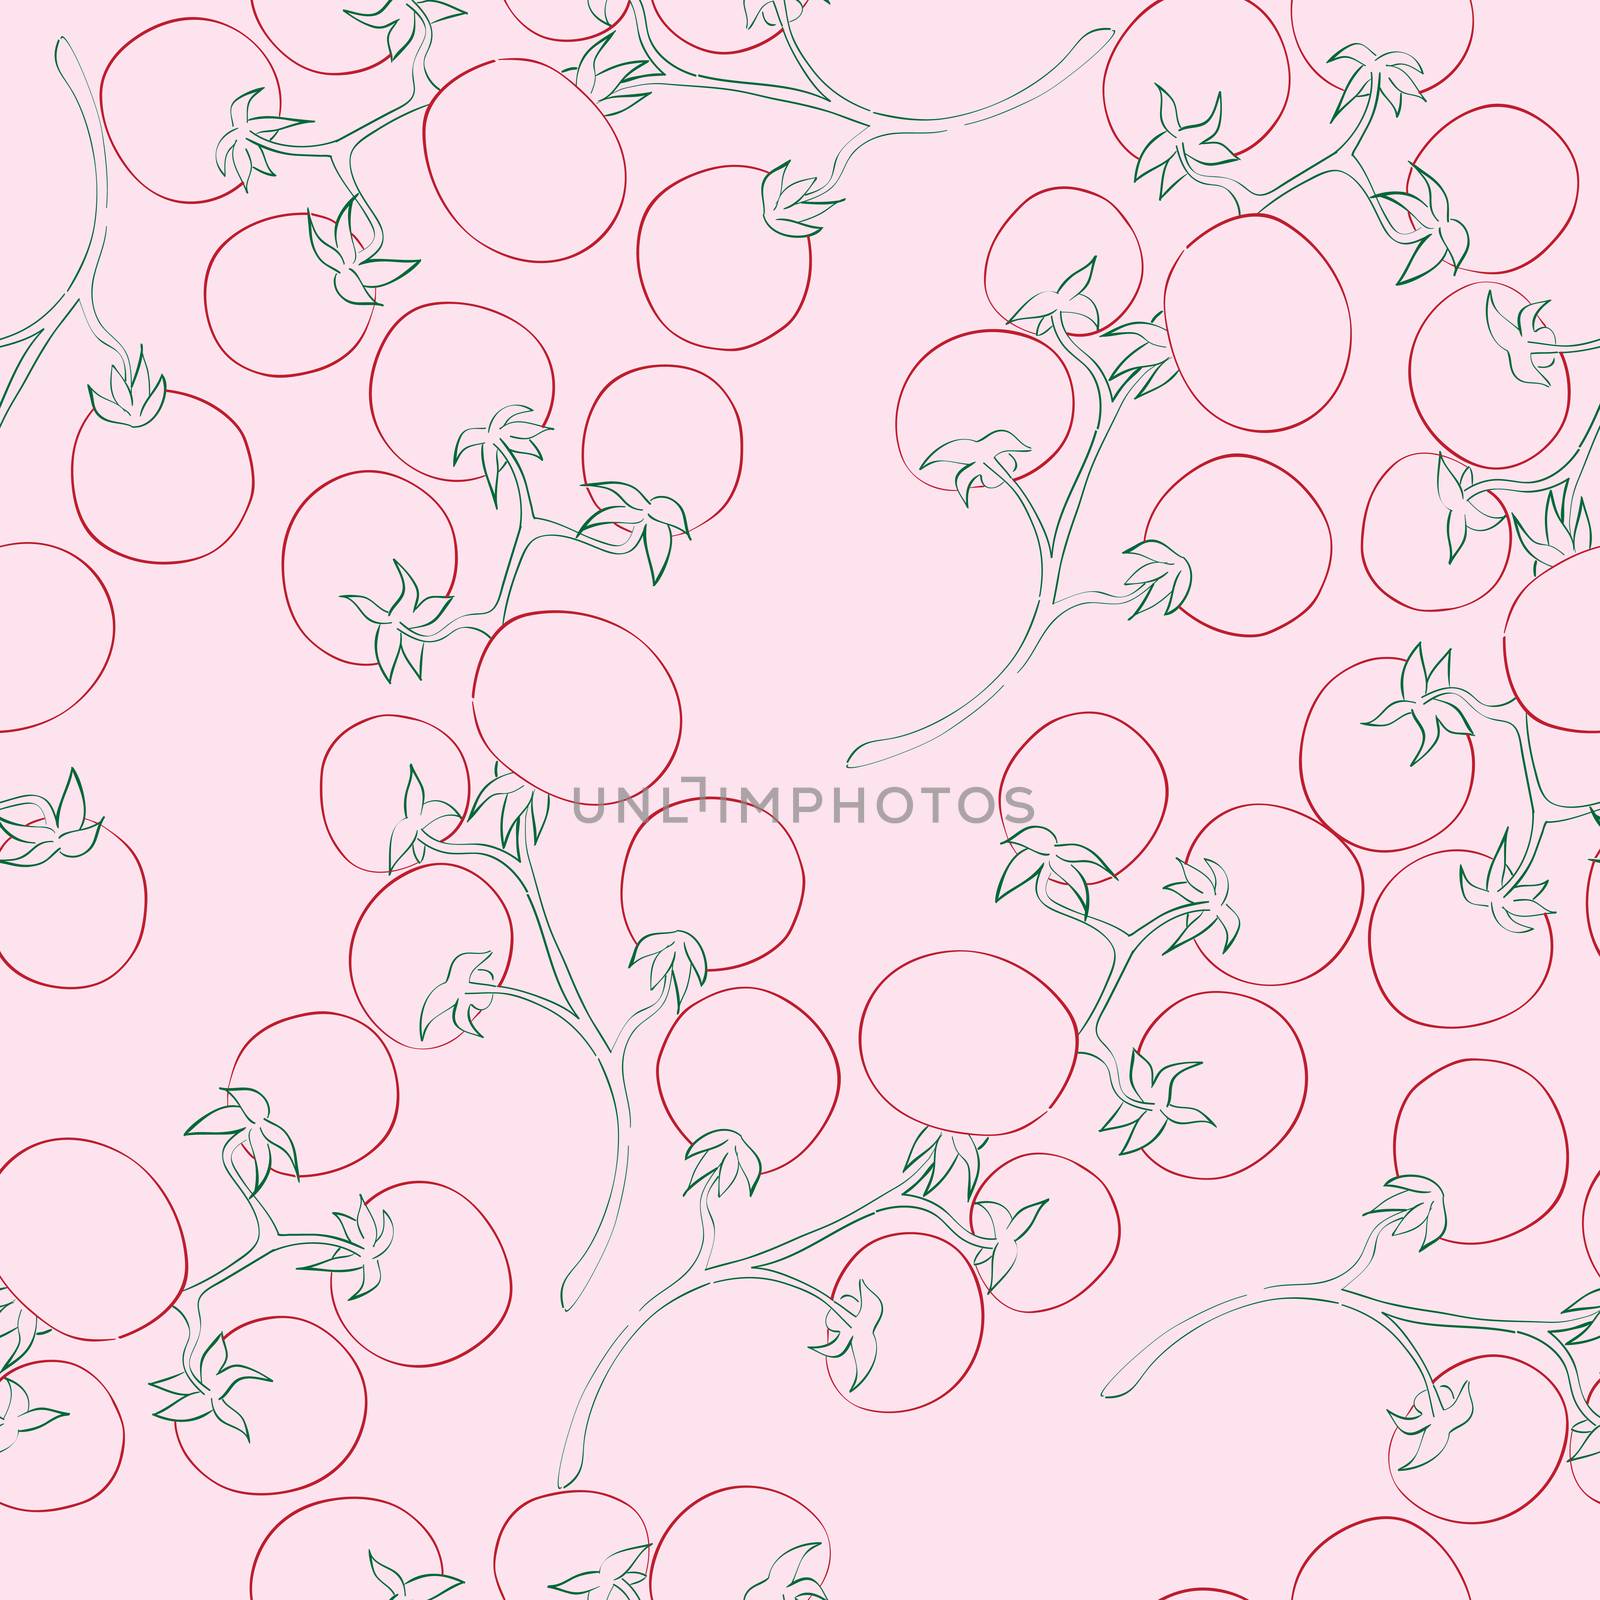 cherry tomatoes pattern by catacos